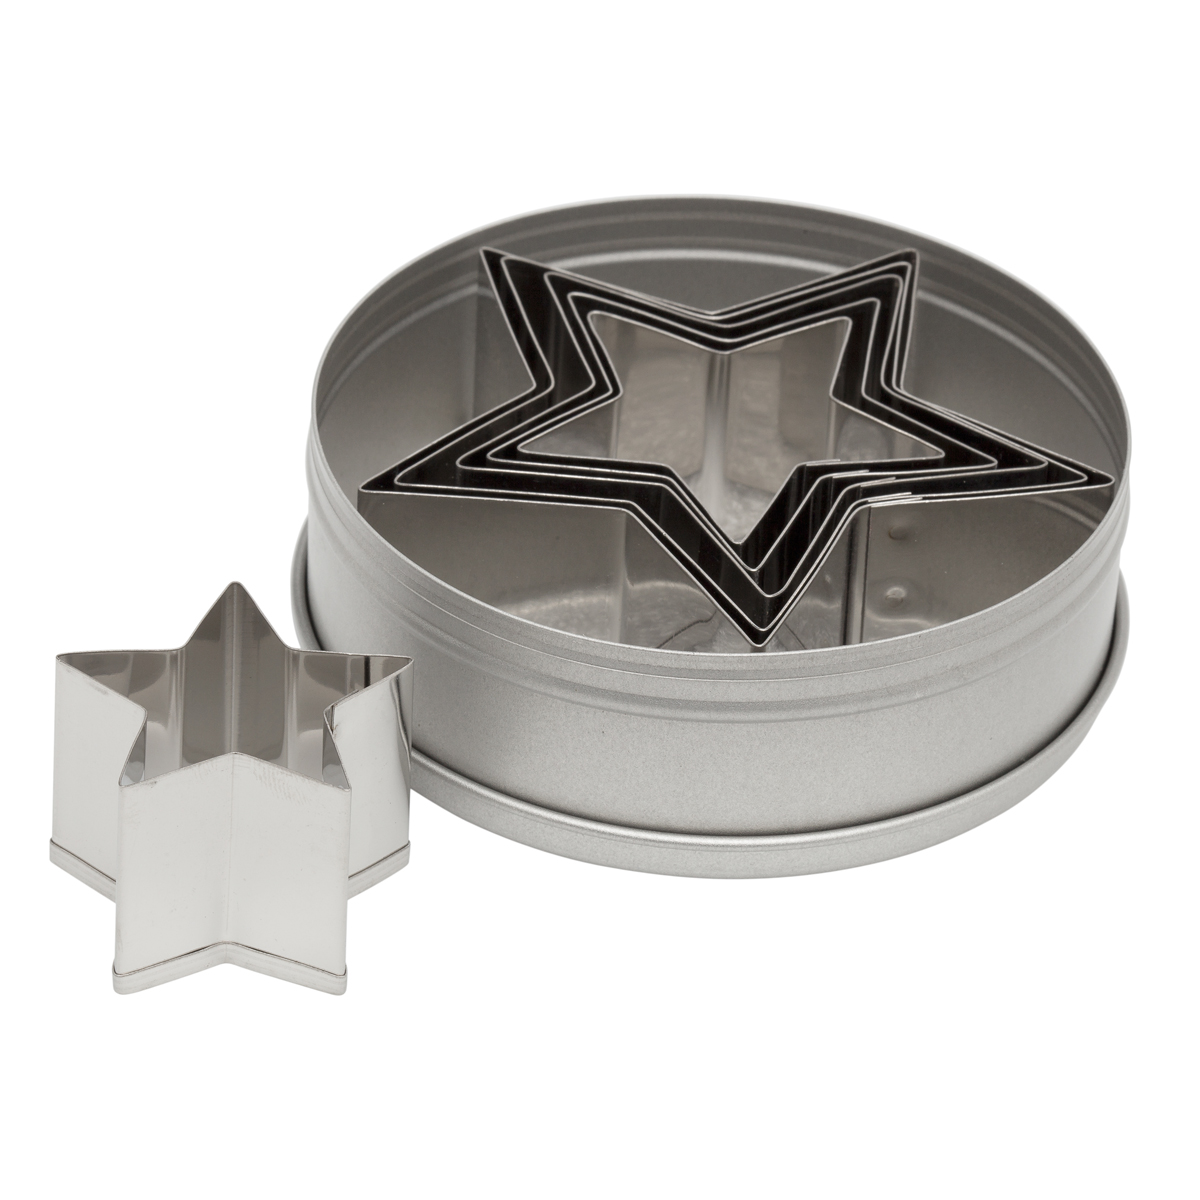 Ateco Star Cutter Set - Plain - Stainless Steel in tin box. Sizes ranging from 1-3/4" to 3-1/2" diam. 6 Pc. Set 